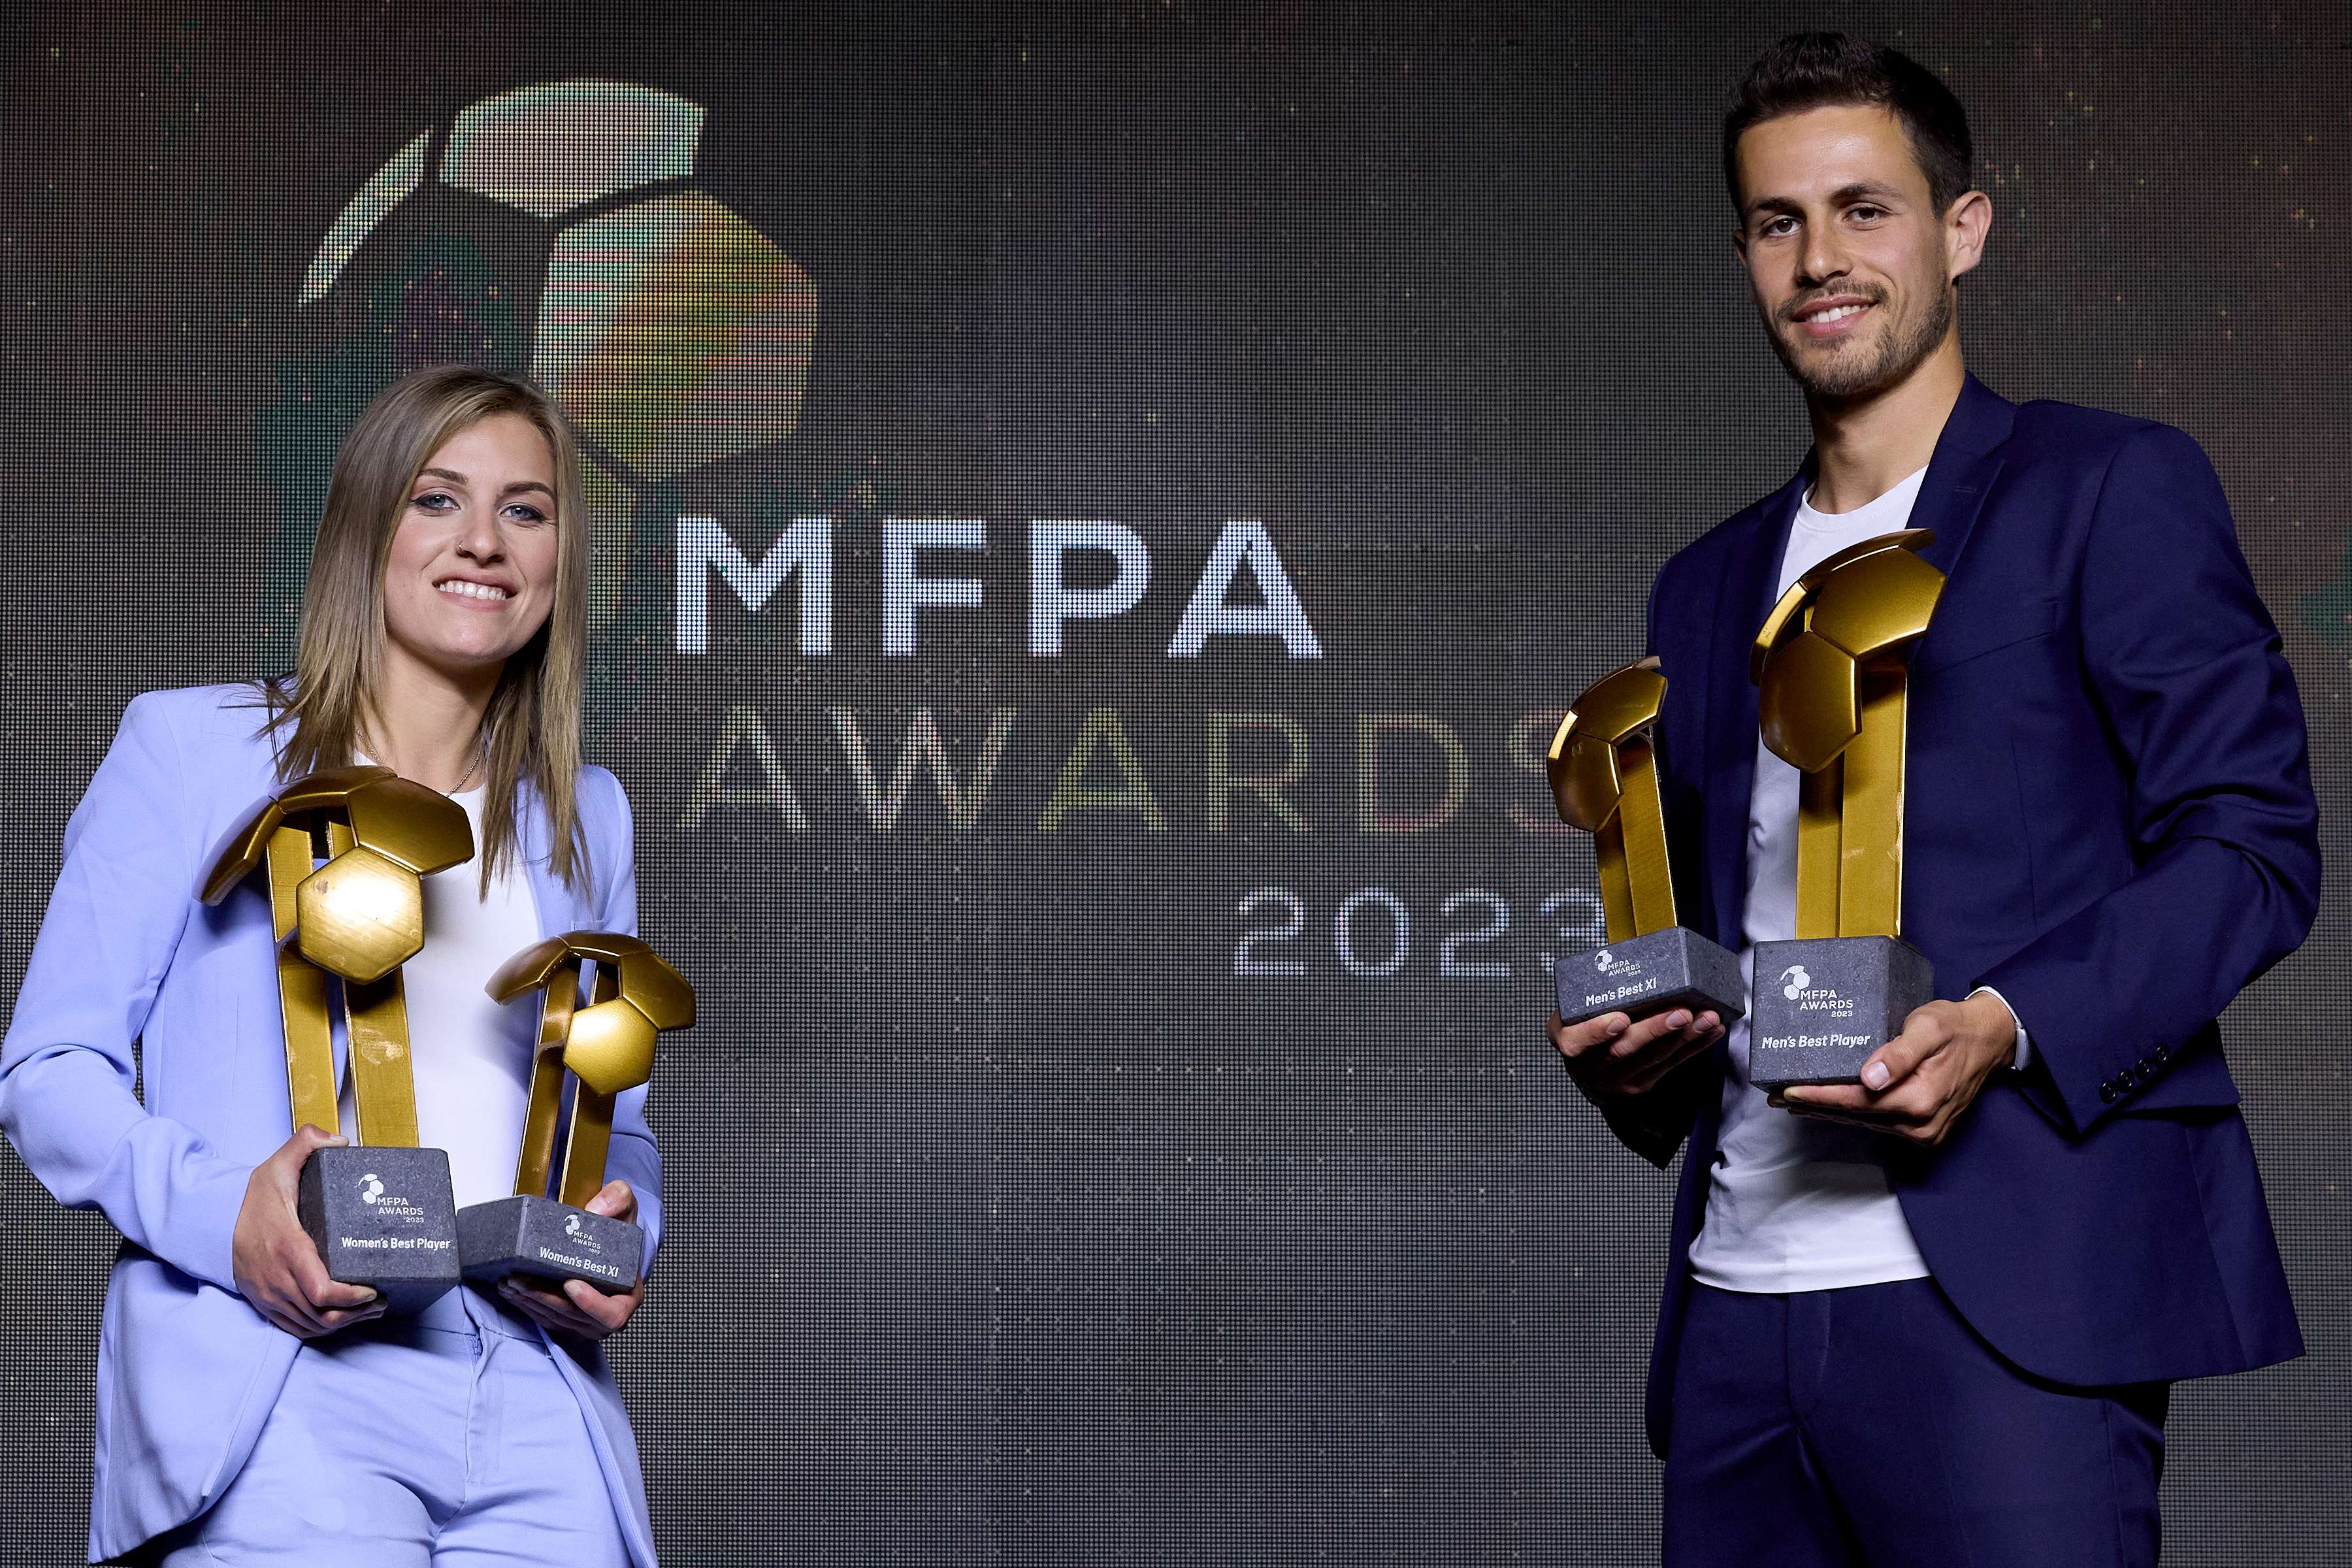 Guillaumier and Flask top the charts at MFPA Awards 2023